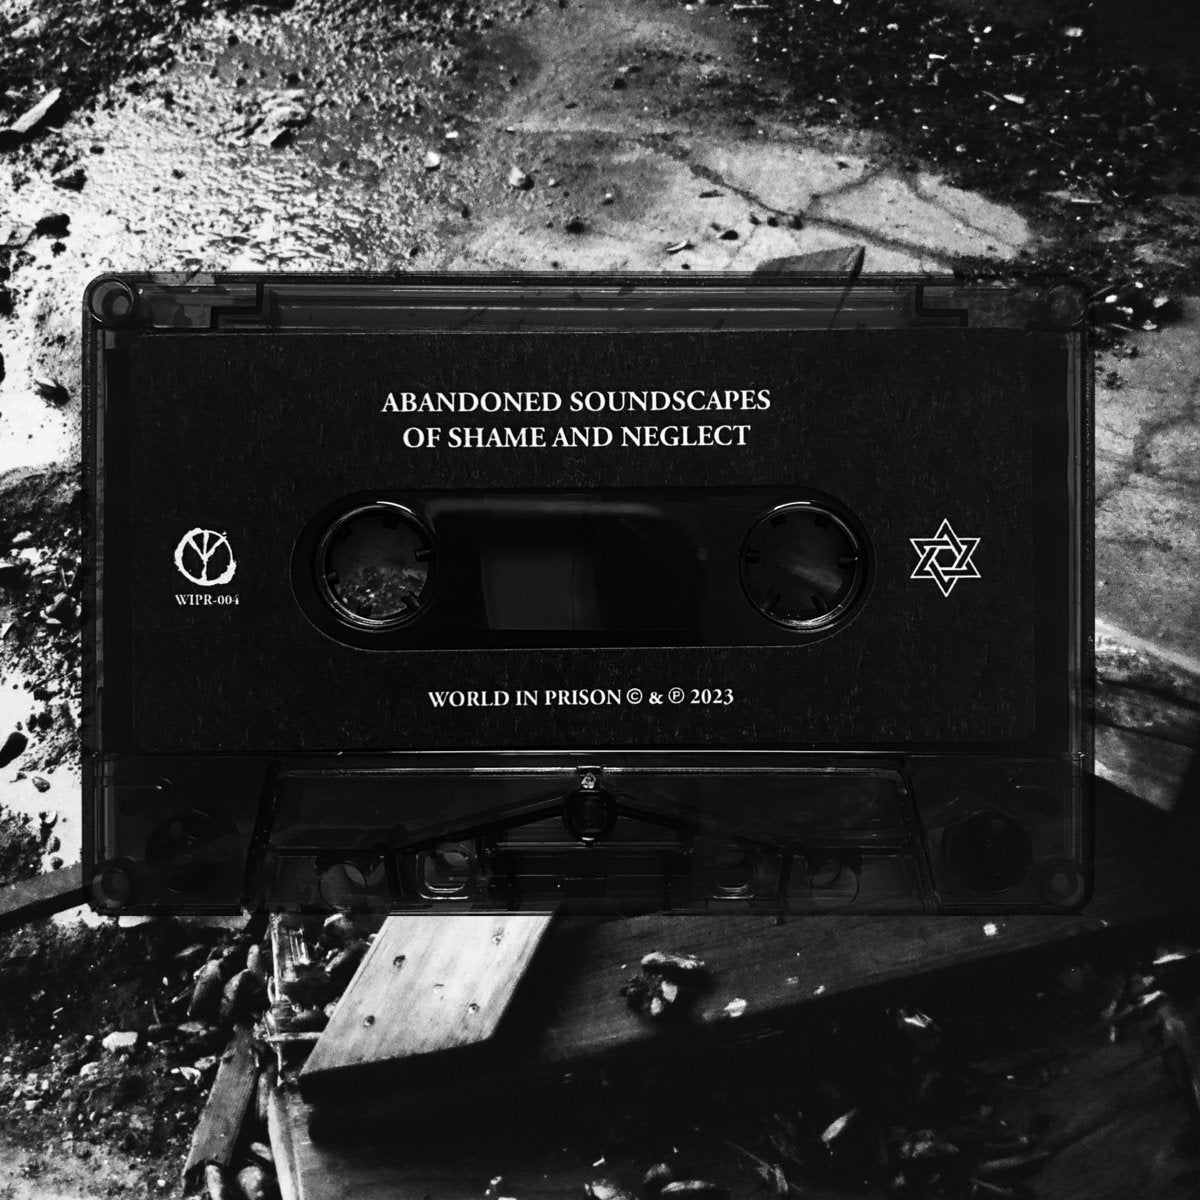 AVUDIM "Abandoned Soundscapes of Shame and Neglect" Cassette Tape